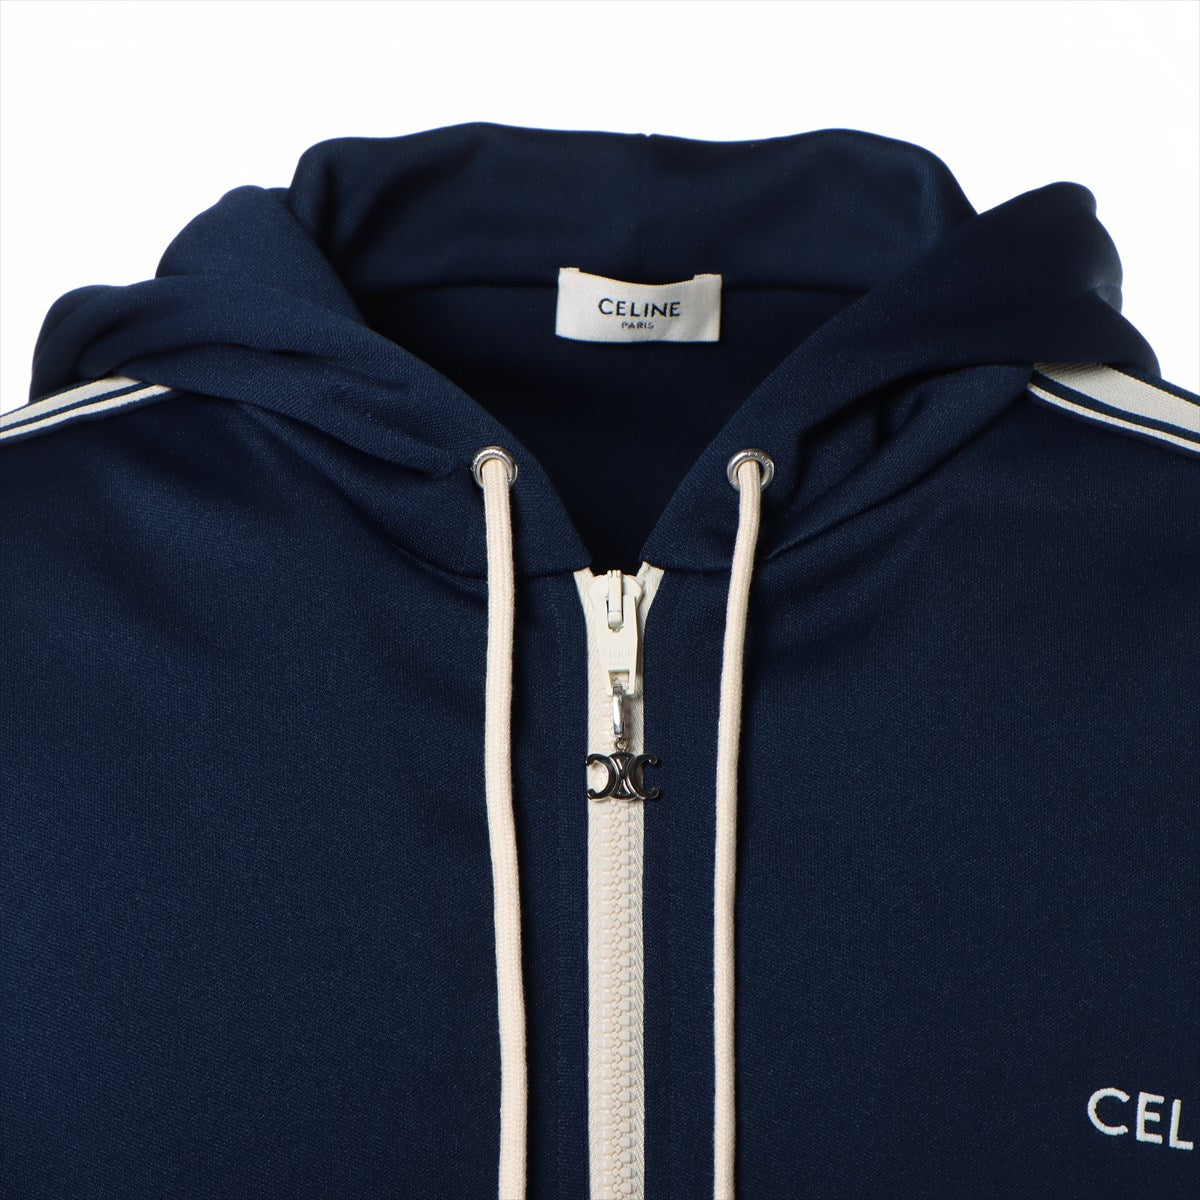 CELINE Triomphe 23SS Cotton & polyester Sweatsuit S Men's White x navy  tracksuit jacket classic fit 2Y58B121O